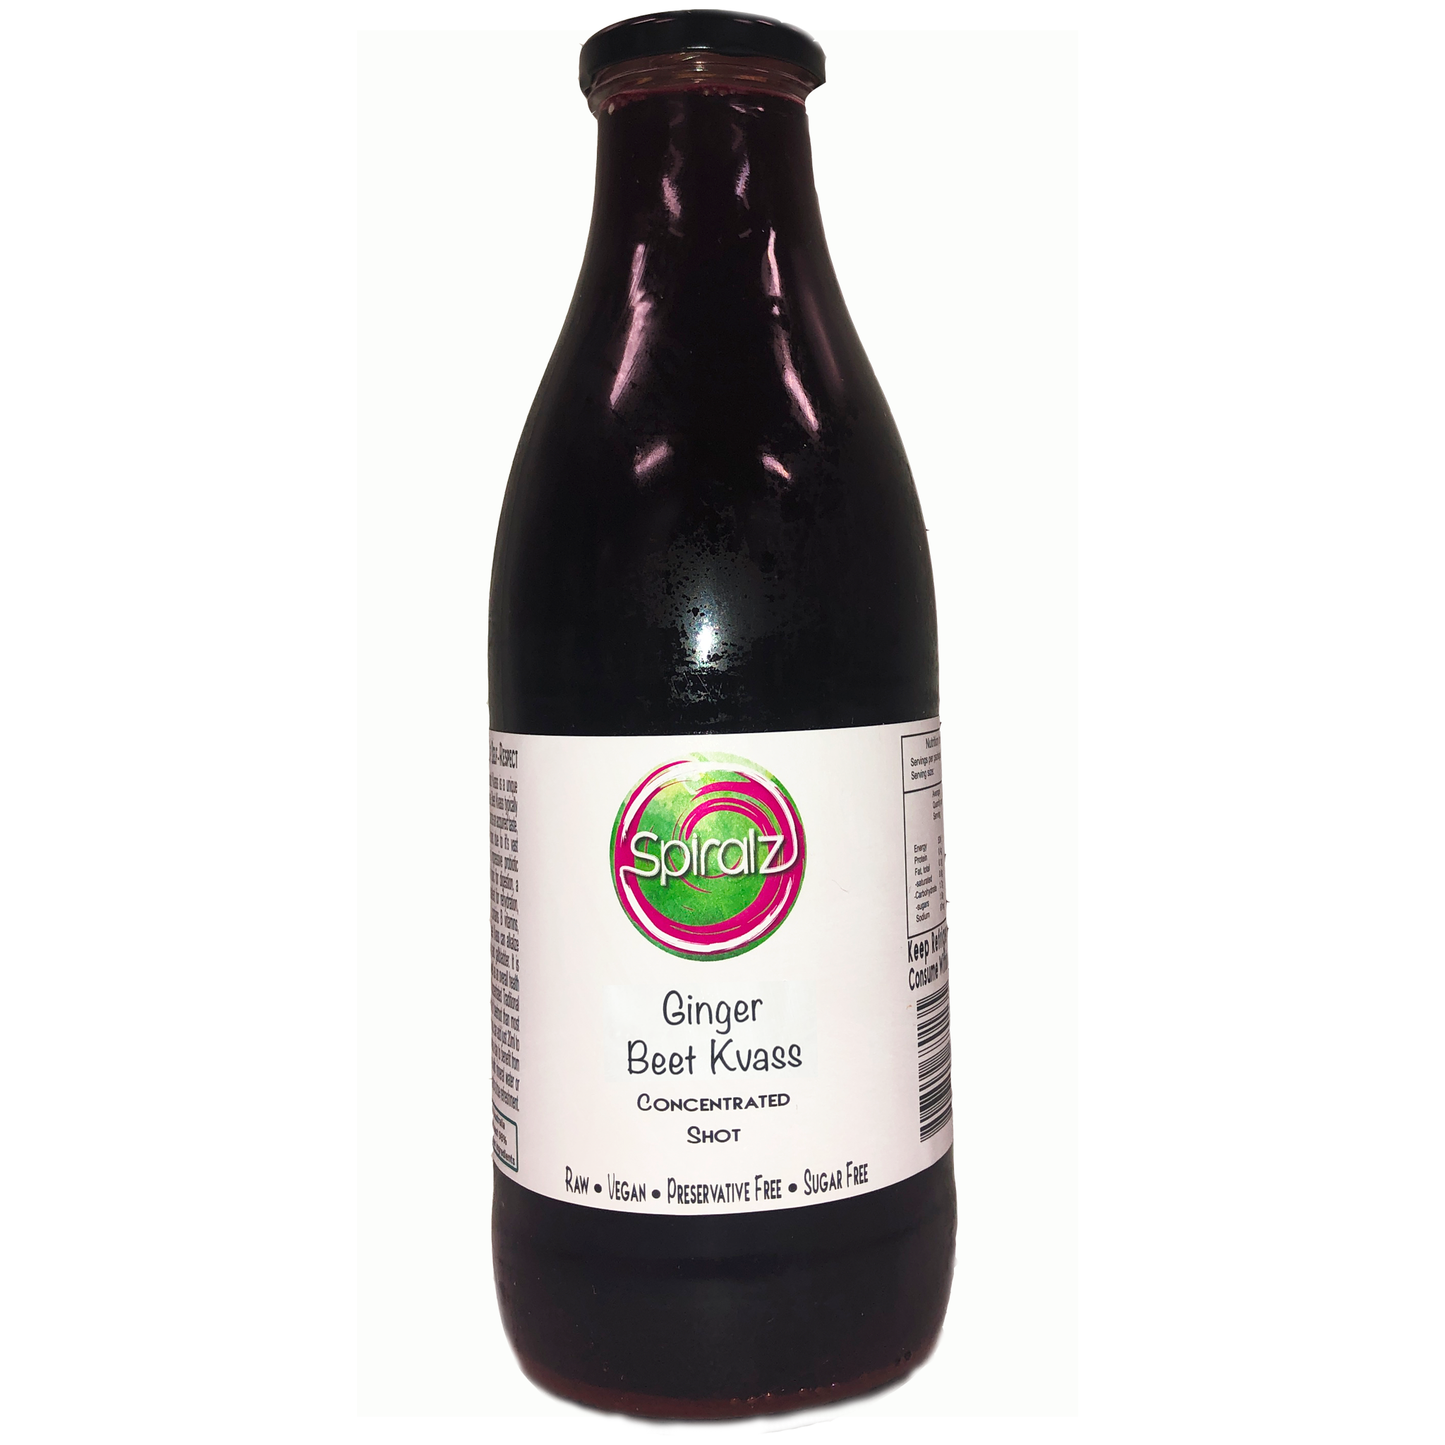 Spiralz Organic Concentrated Beet Kvass with Ginger